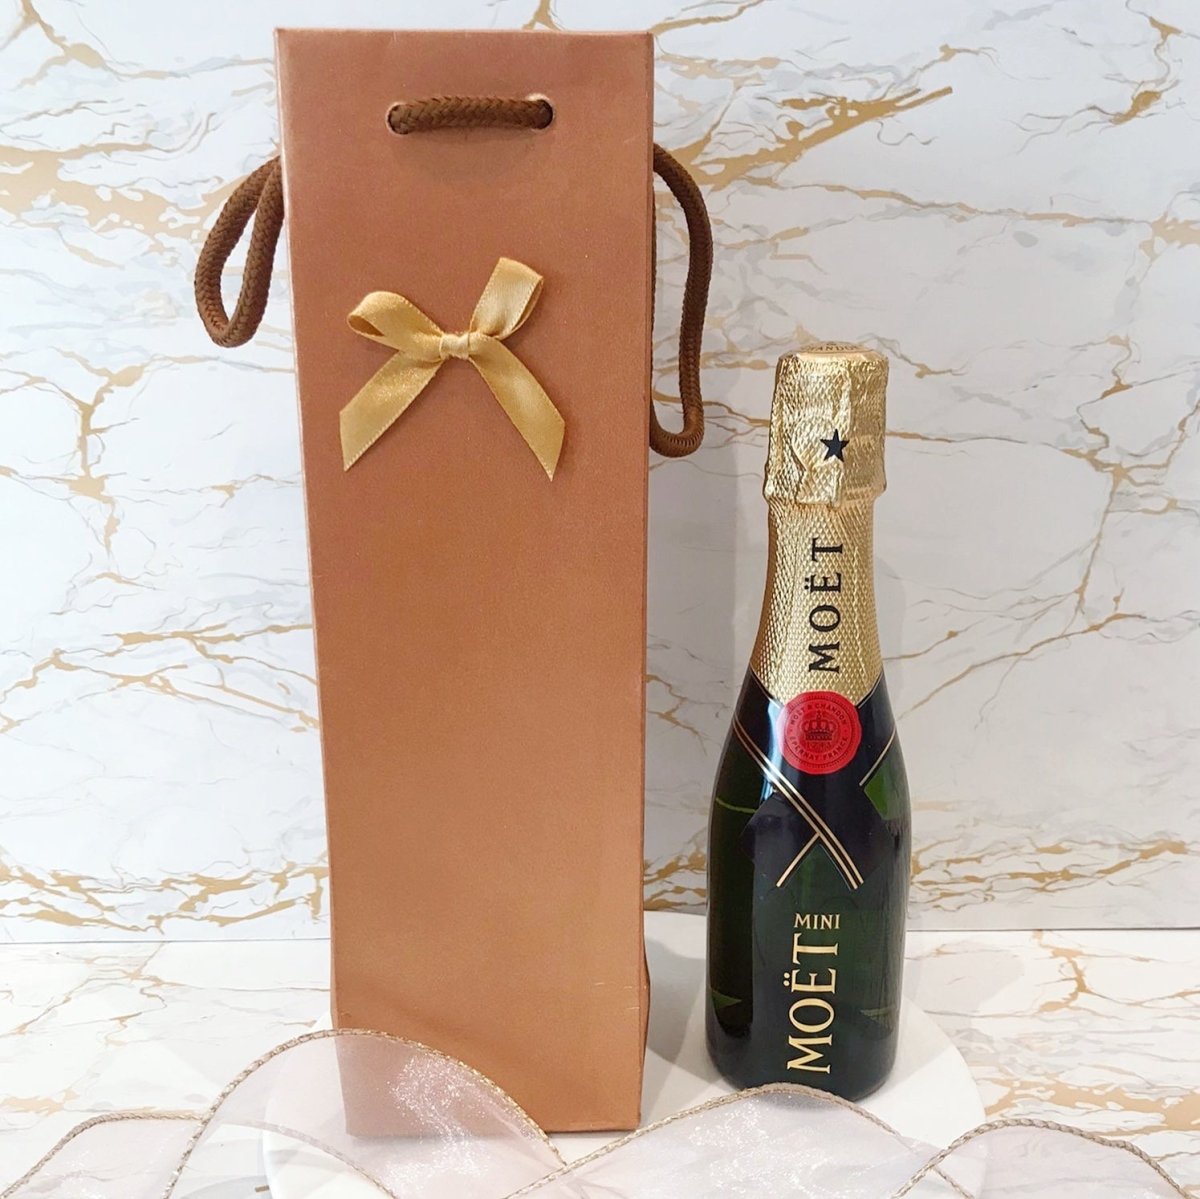 Moët and Chandon Mini Imperial Brut Champagne (187 ml)